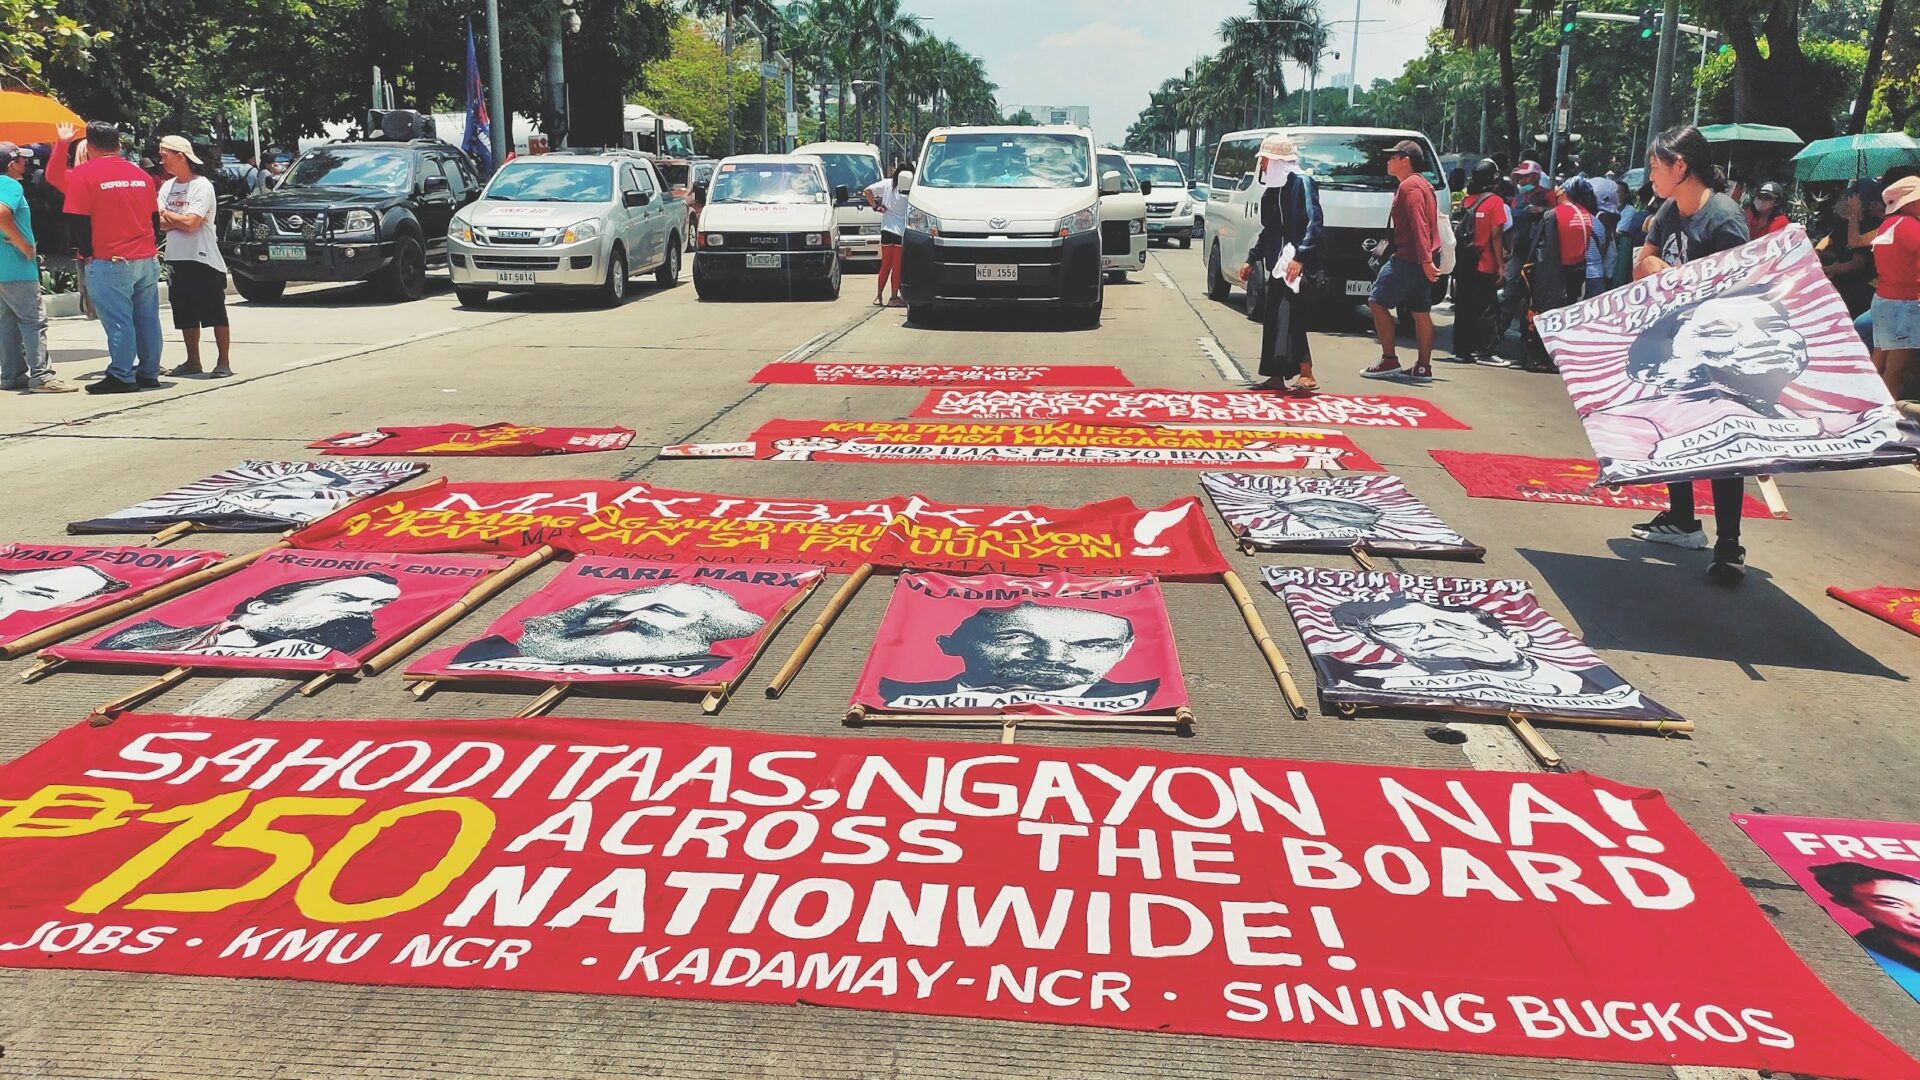 Meanwhile, upon arrival in front of the US Embassy, protest groups lay down their flags, placards, and posters on the road to highlight their cause.